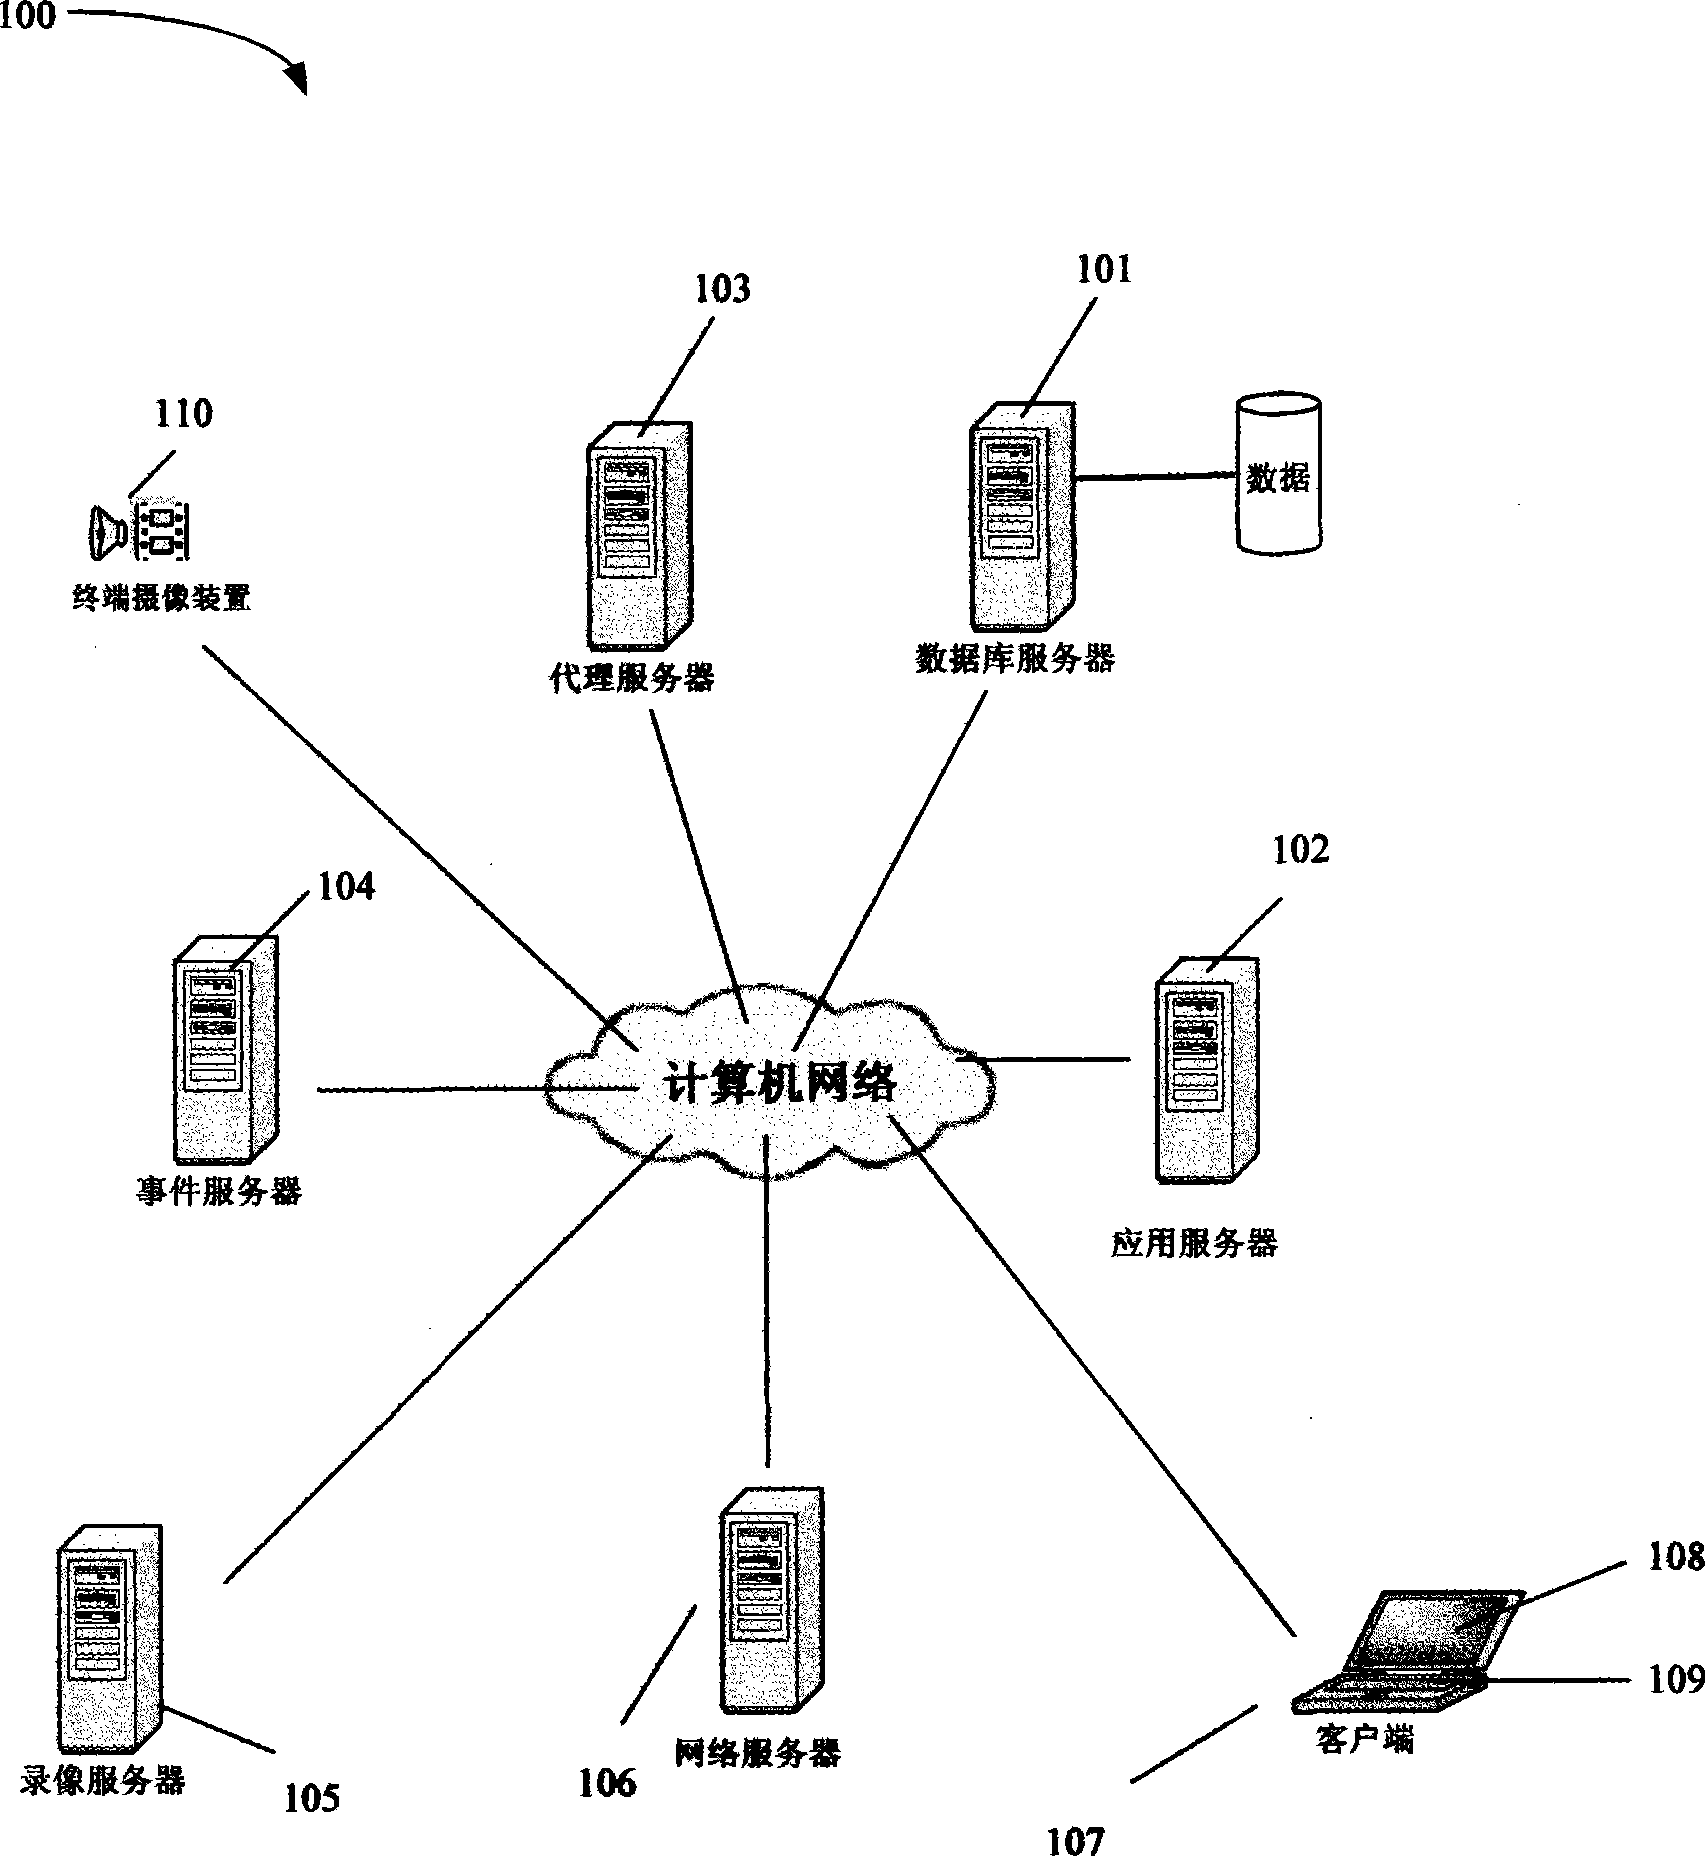 Video monitoring system based on computer network